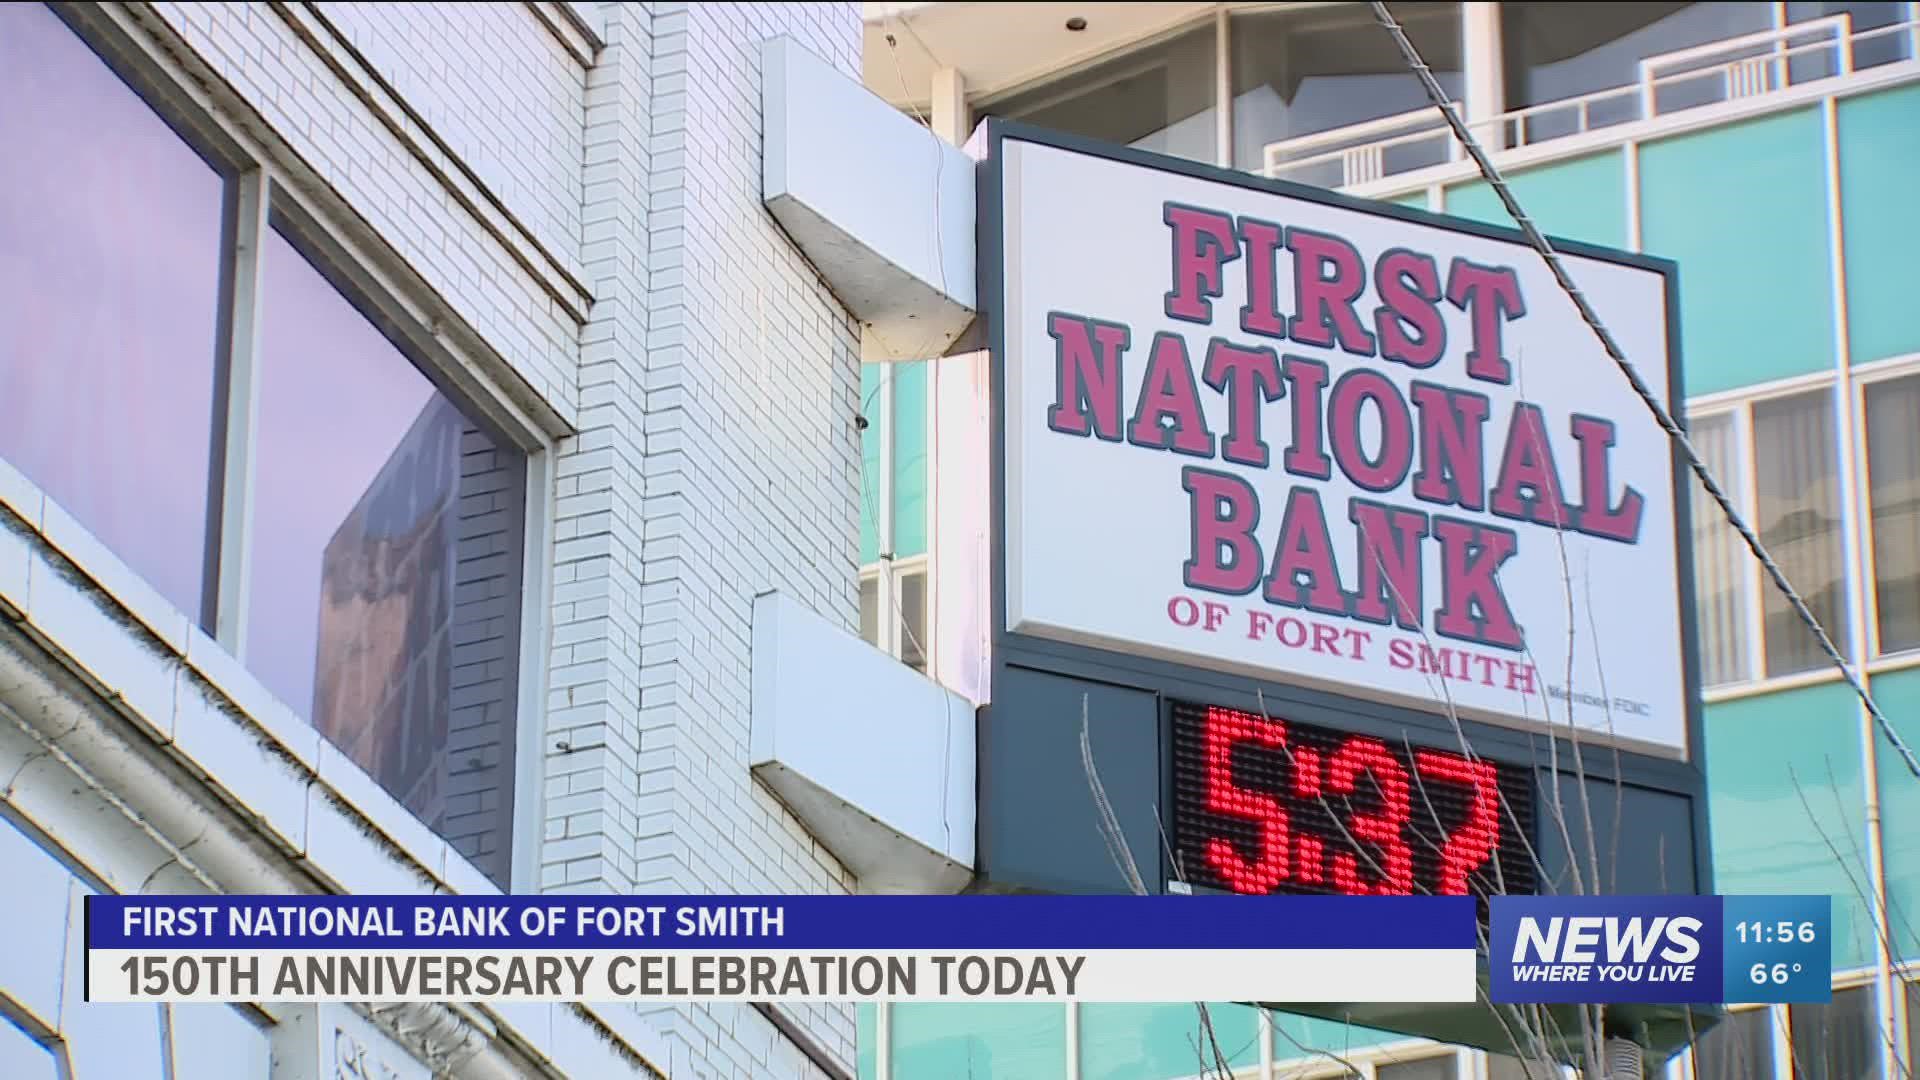 First National Bank of Fort Smith celebrated 150 years of business with several guest speakers, history discussions and artifact displays.